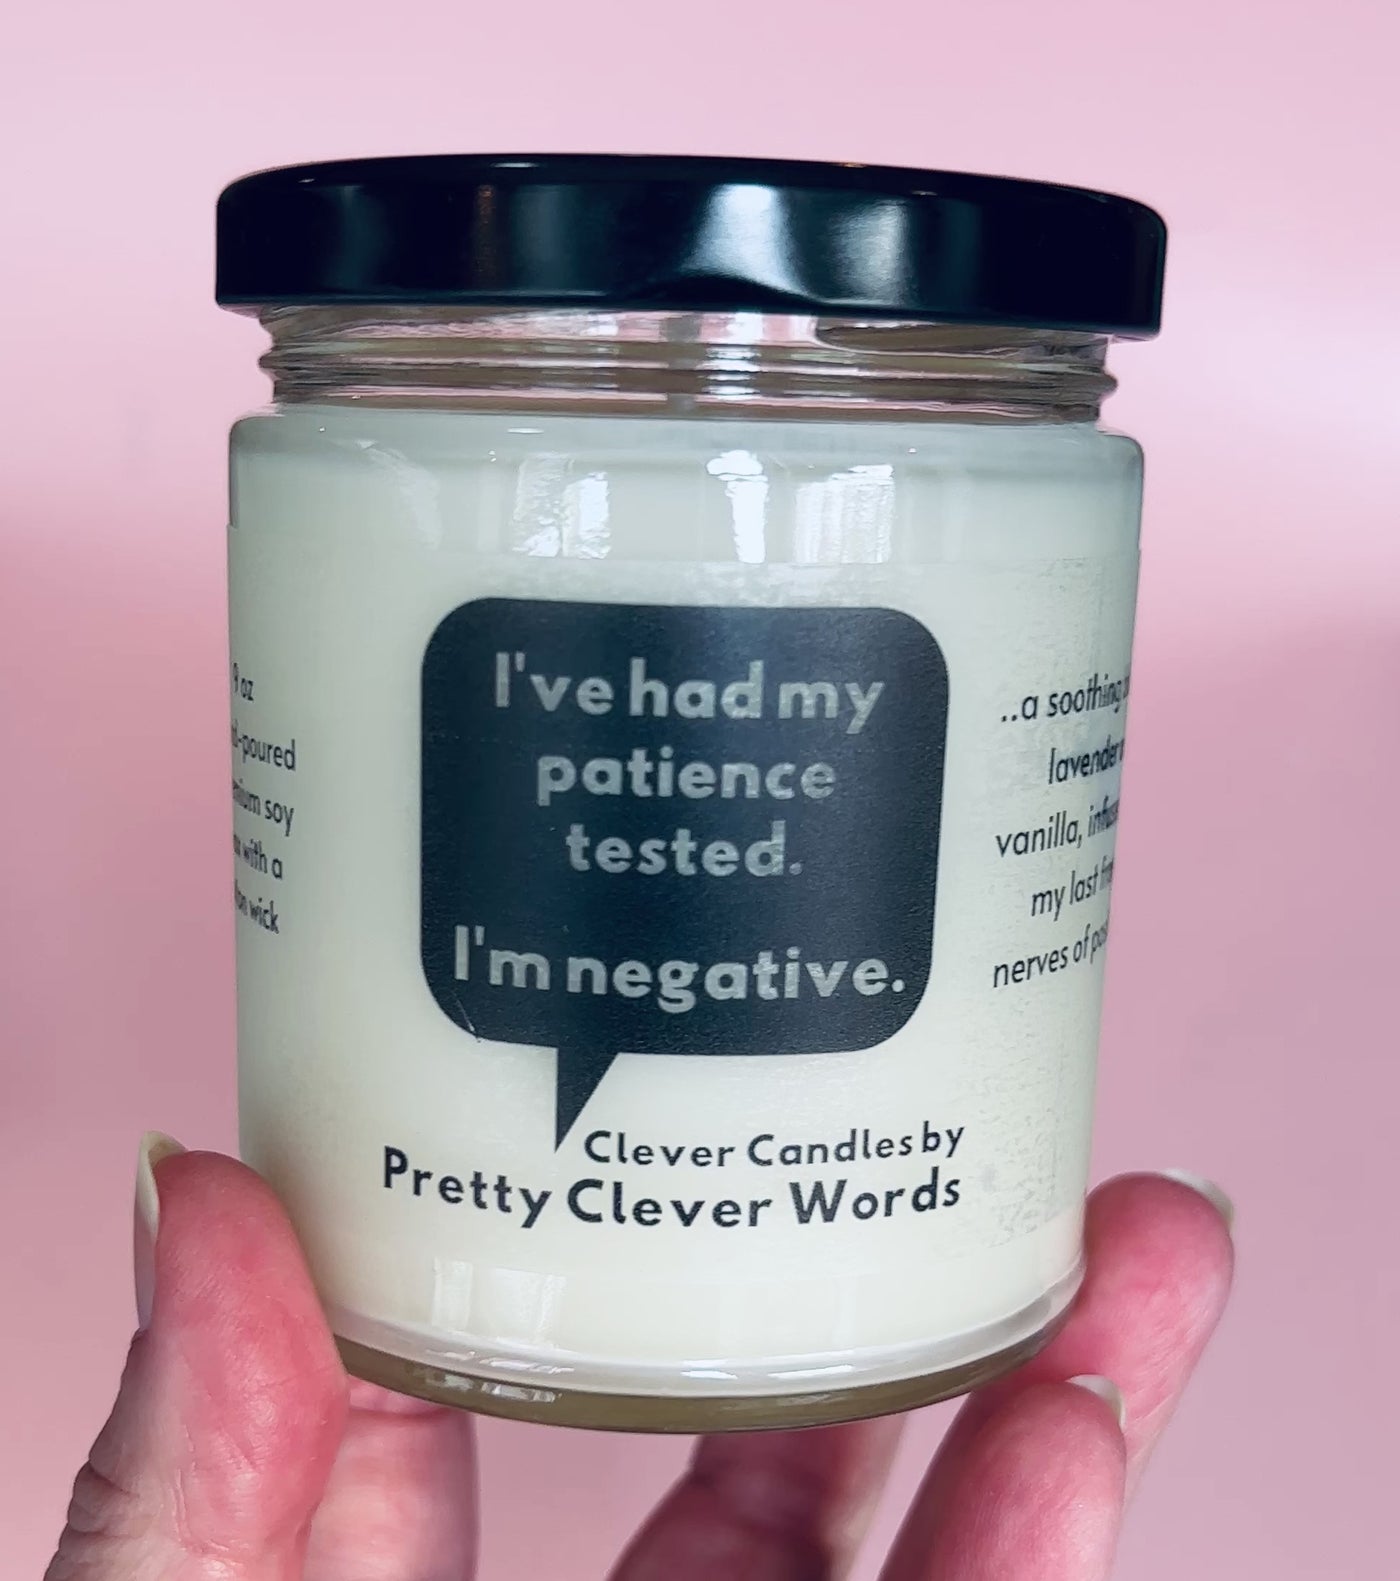 I've had my patience tested and I'm negative word bubble - lavender vanilla candle